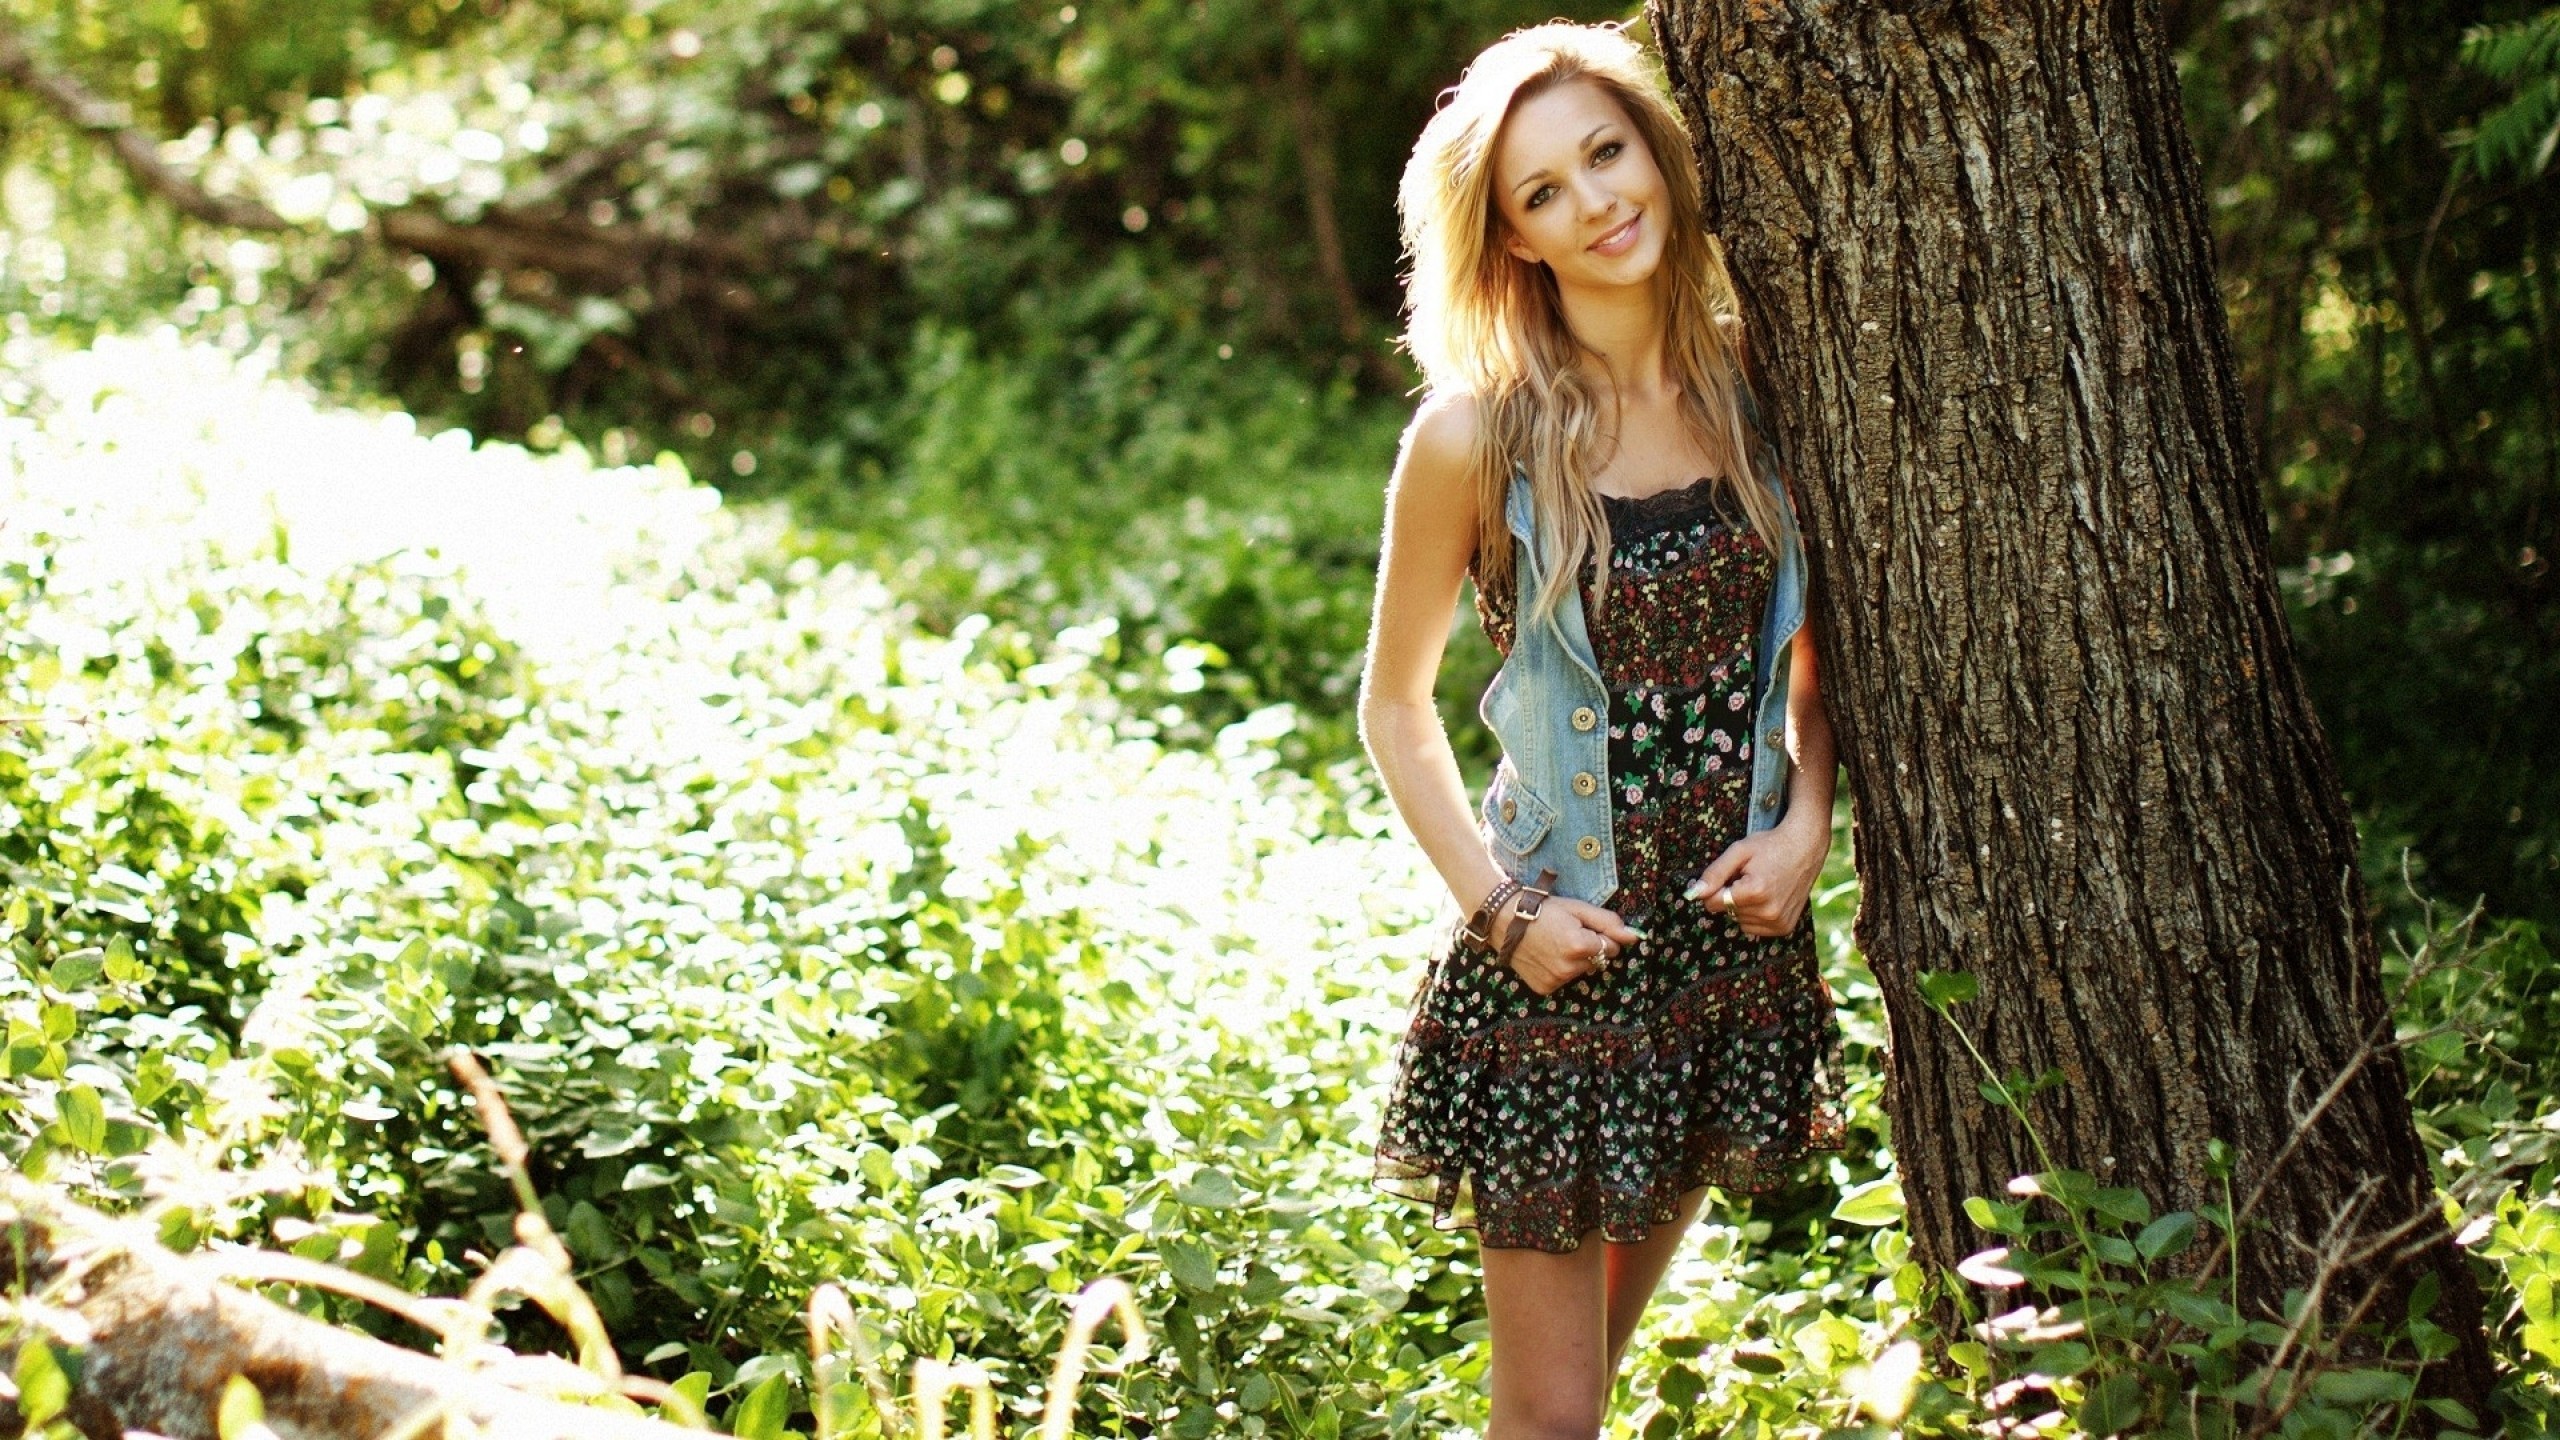 Cute Blonde Leaning Against A Tree Wallpapers And Images Wallpapers Pictures Photos 